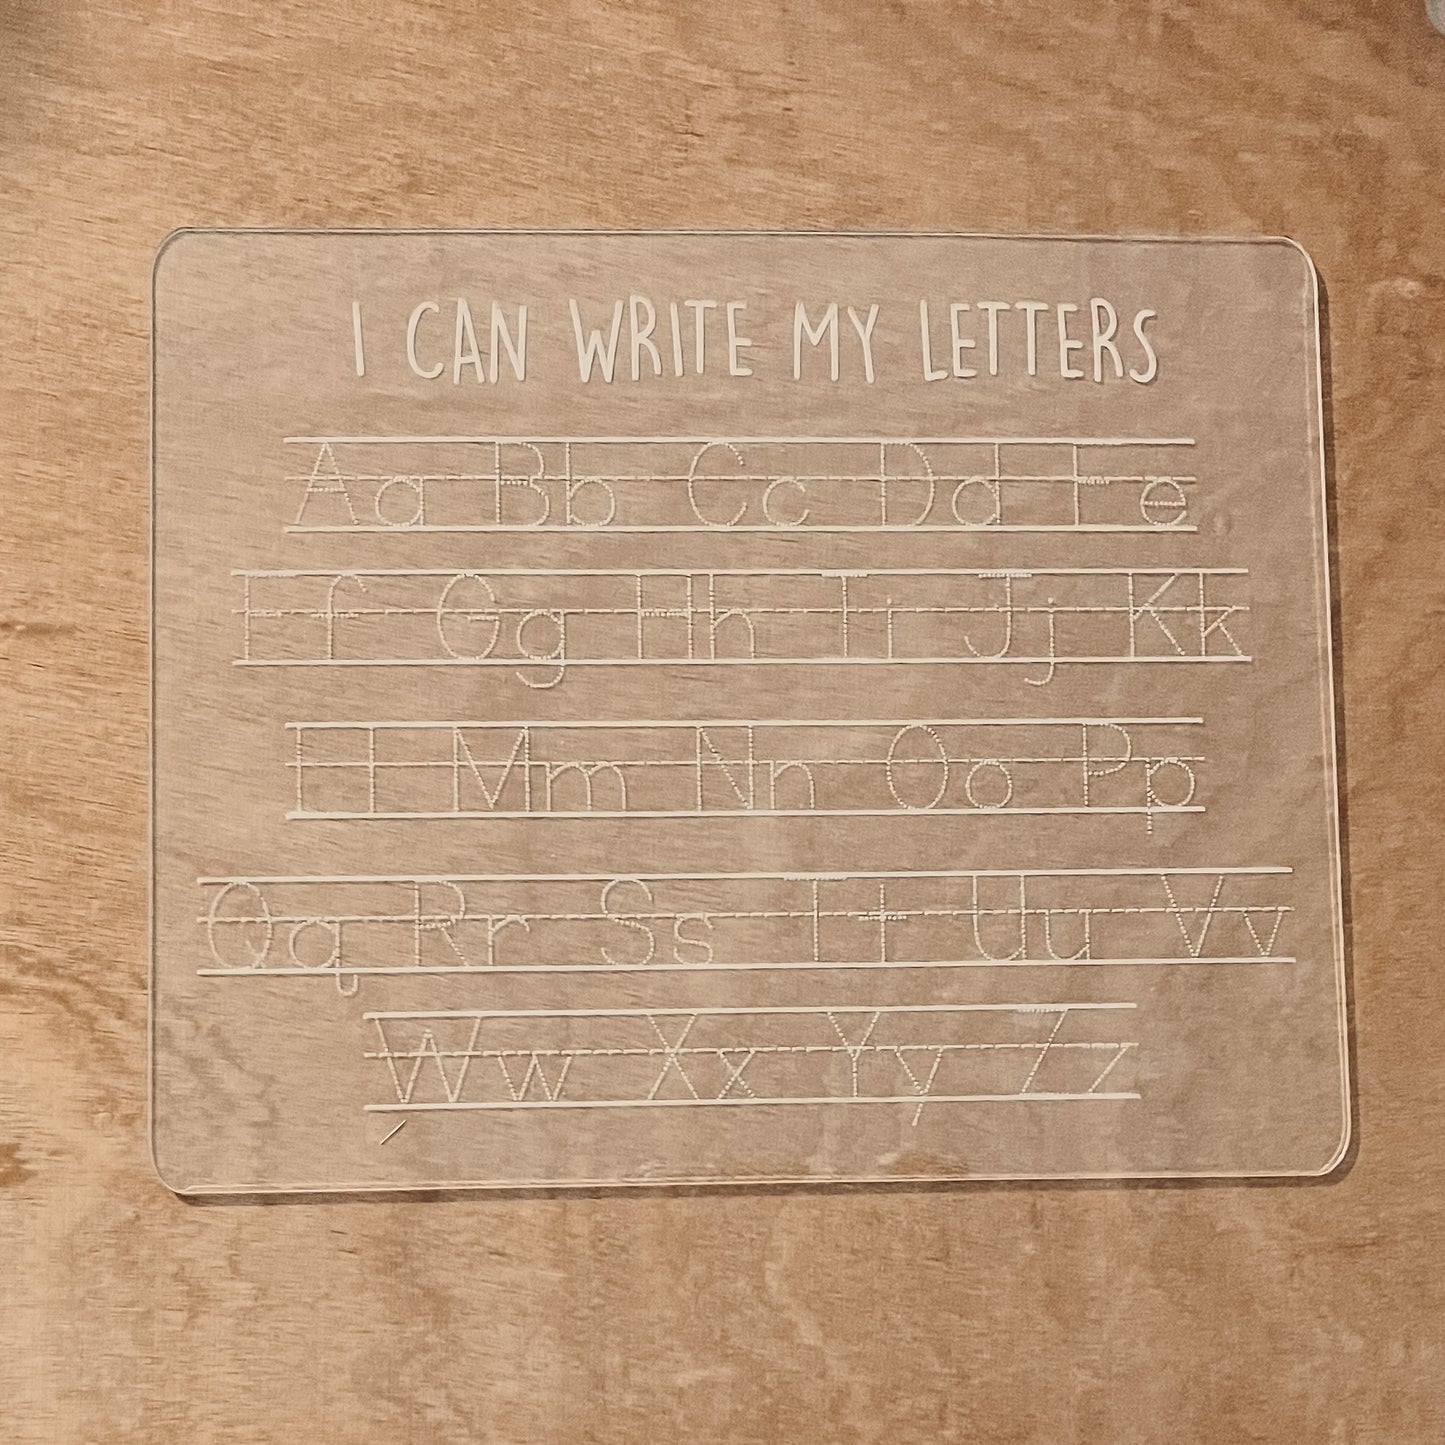 "I CAN WRITE" Boards